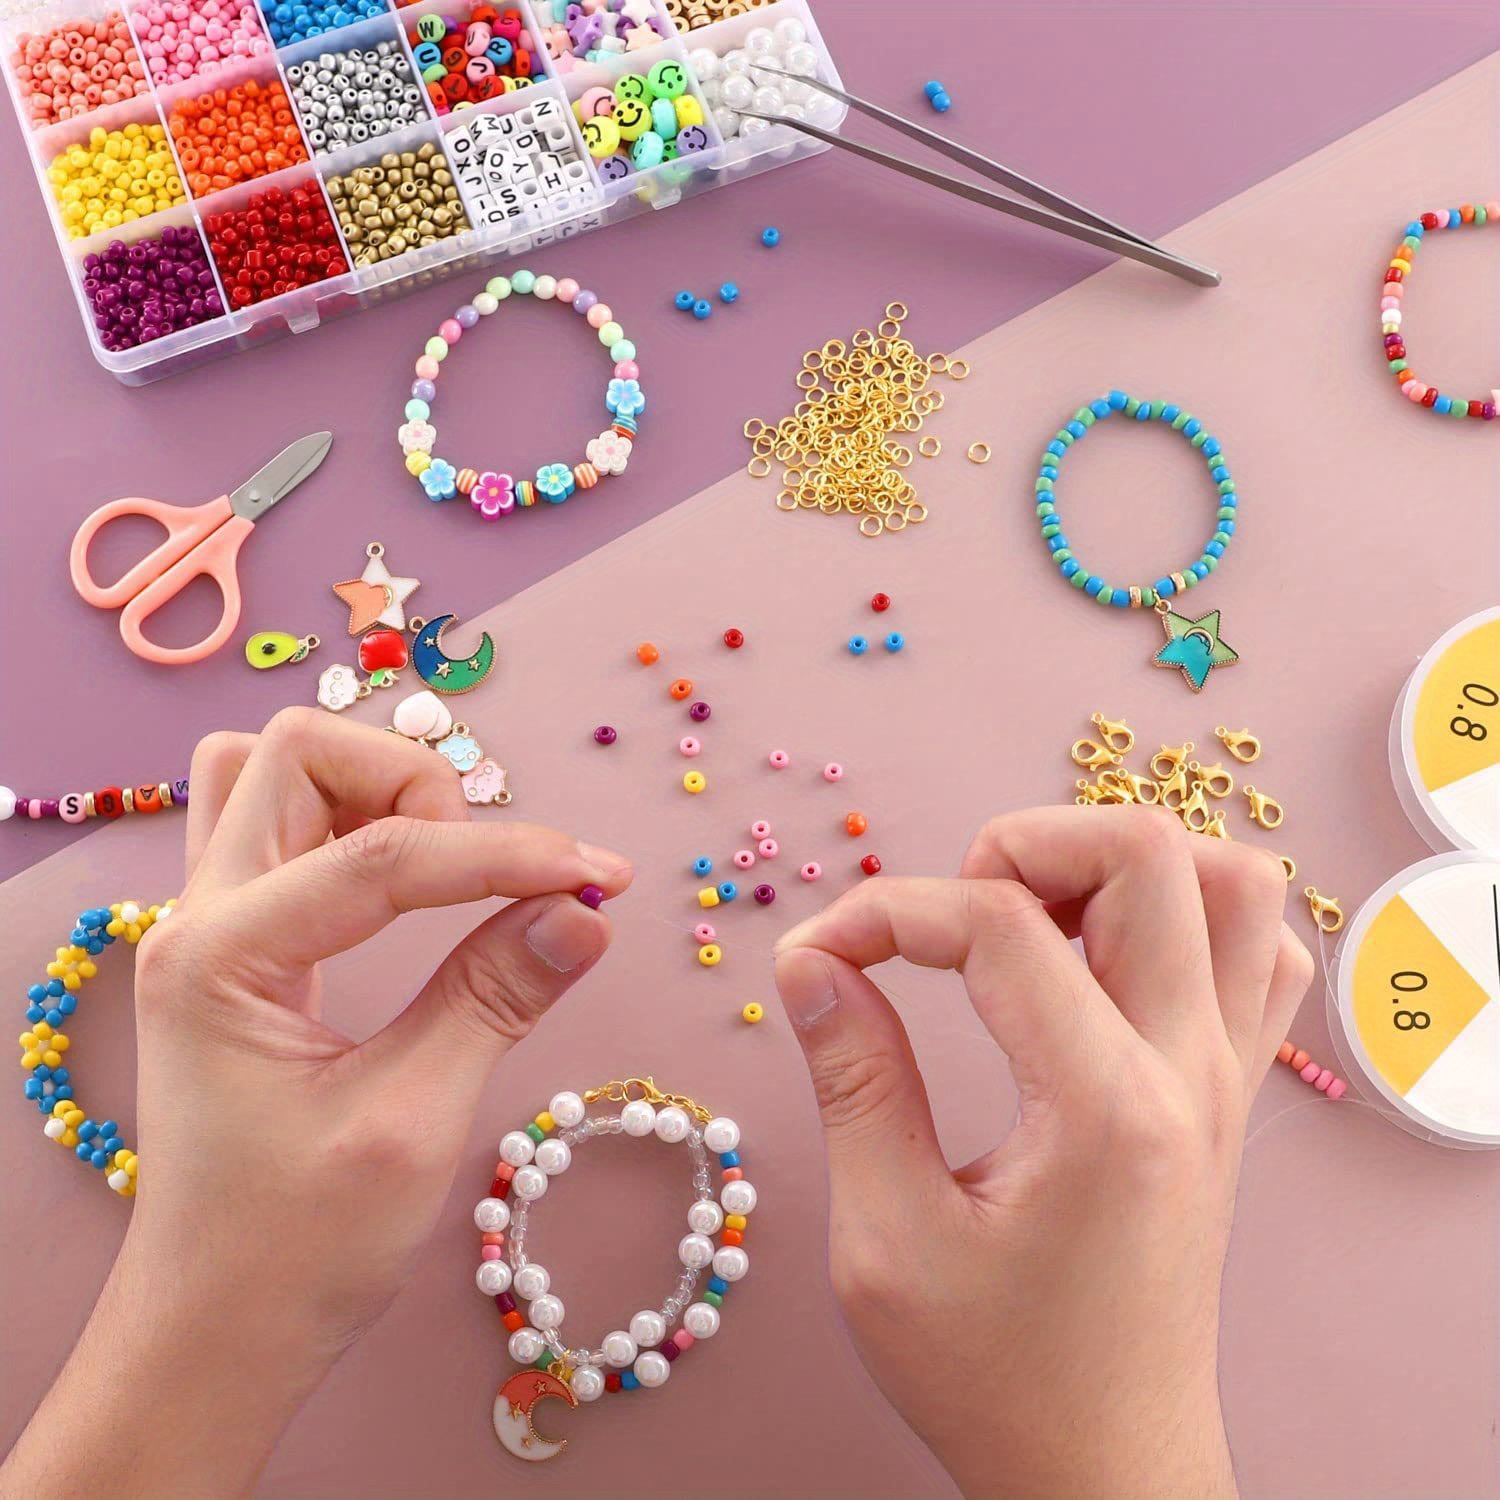  35000Pcs Glass Seed Beads, WOHOOW 2mm 48 Colors 12/0 Beads for  Jewelry Making Kit, Small Glass Bead Craft Set 200Pcs Alphabet Beads and  60Pcs Smiley Beads for Bracelets Earrings Ring Necklaces